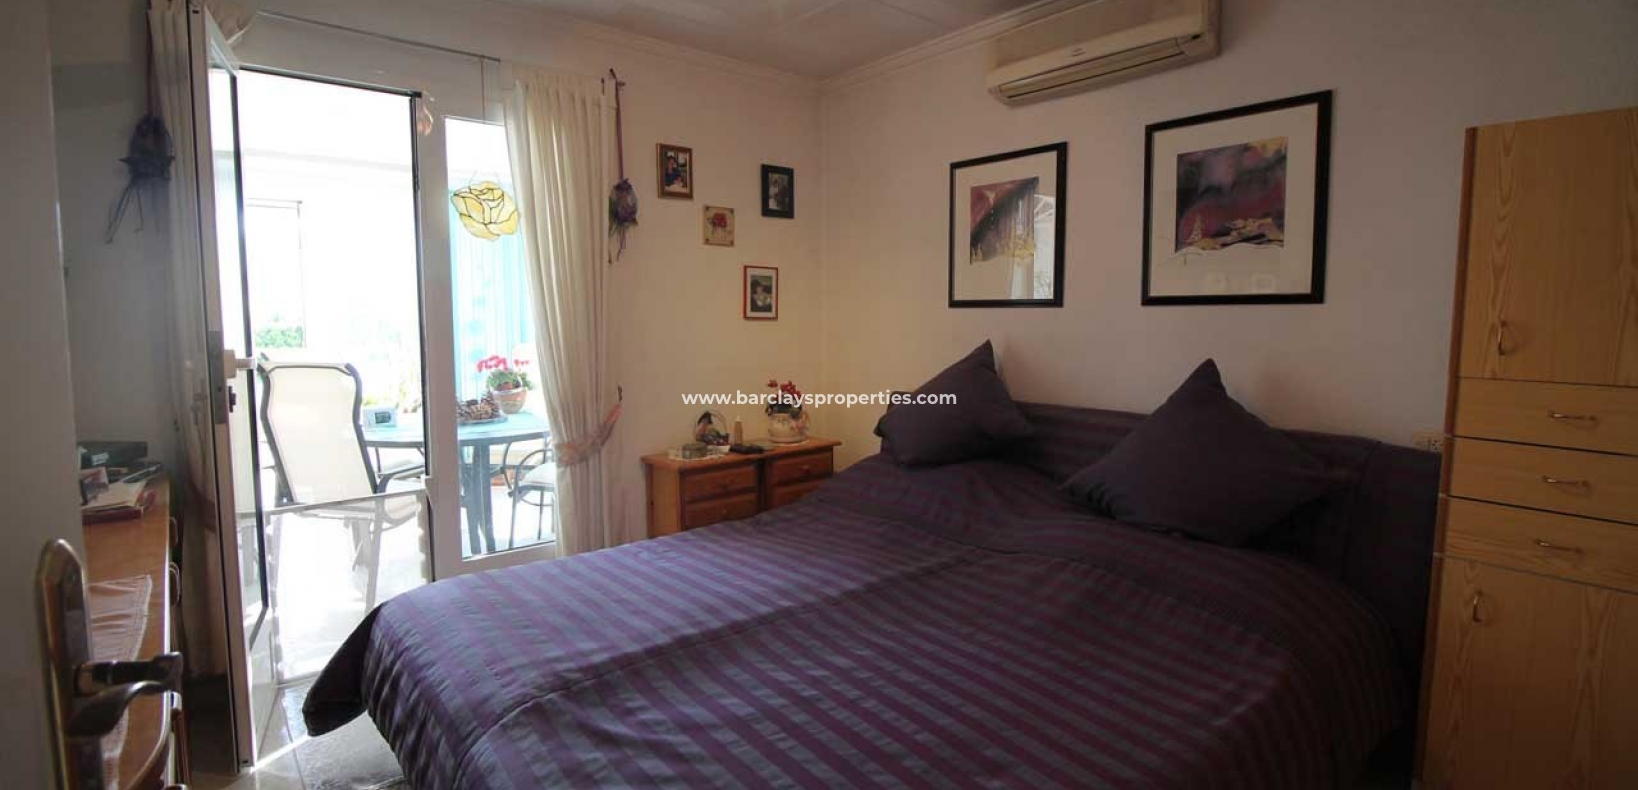 Bedroom - South Facing Property For Sale In La Marina